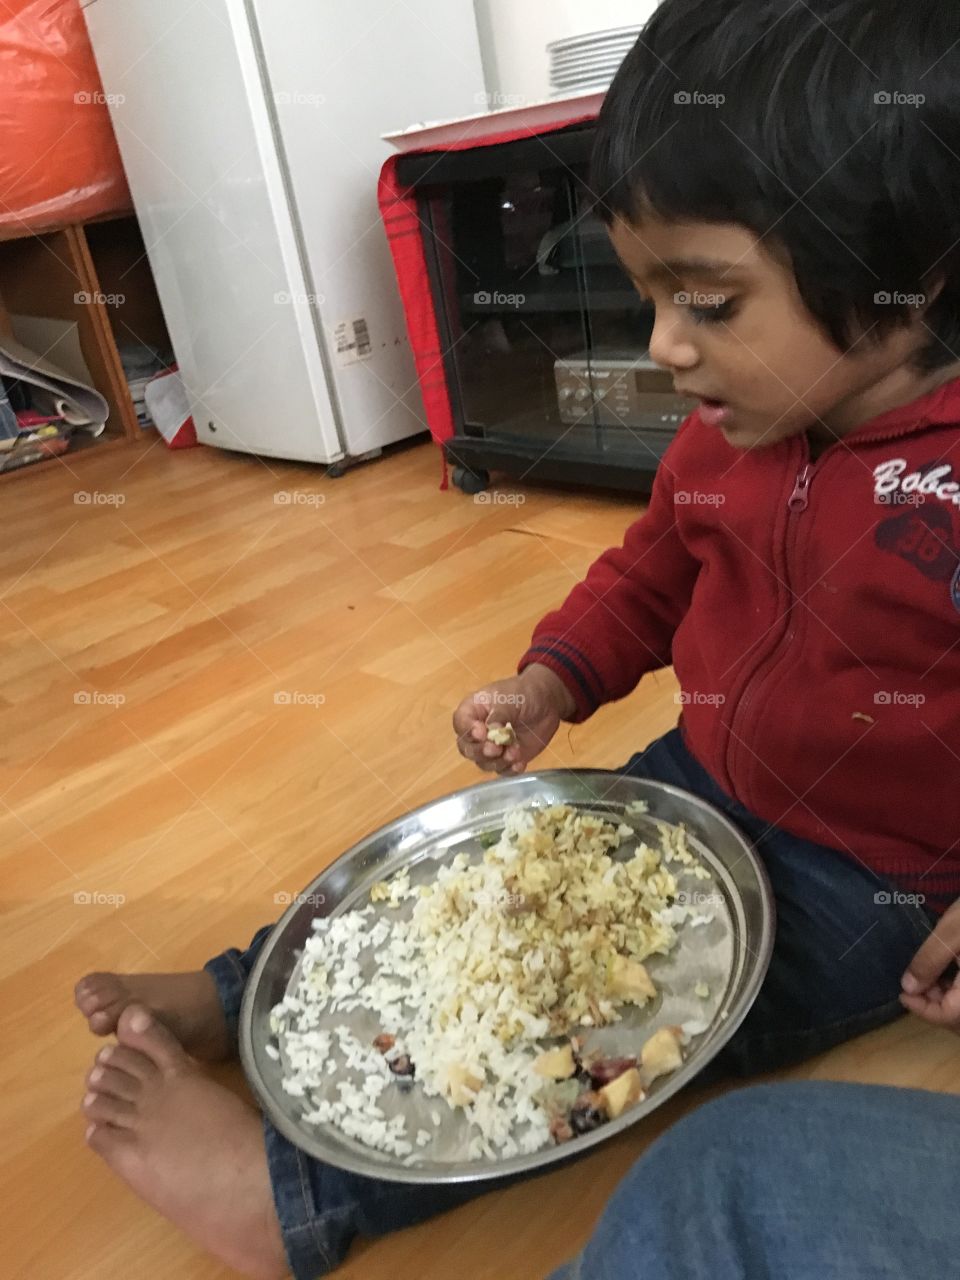 Child eating by his own hands